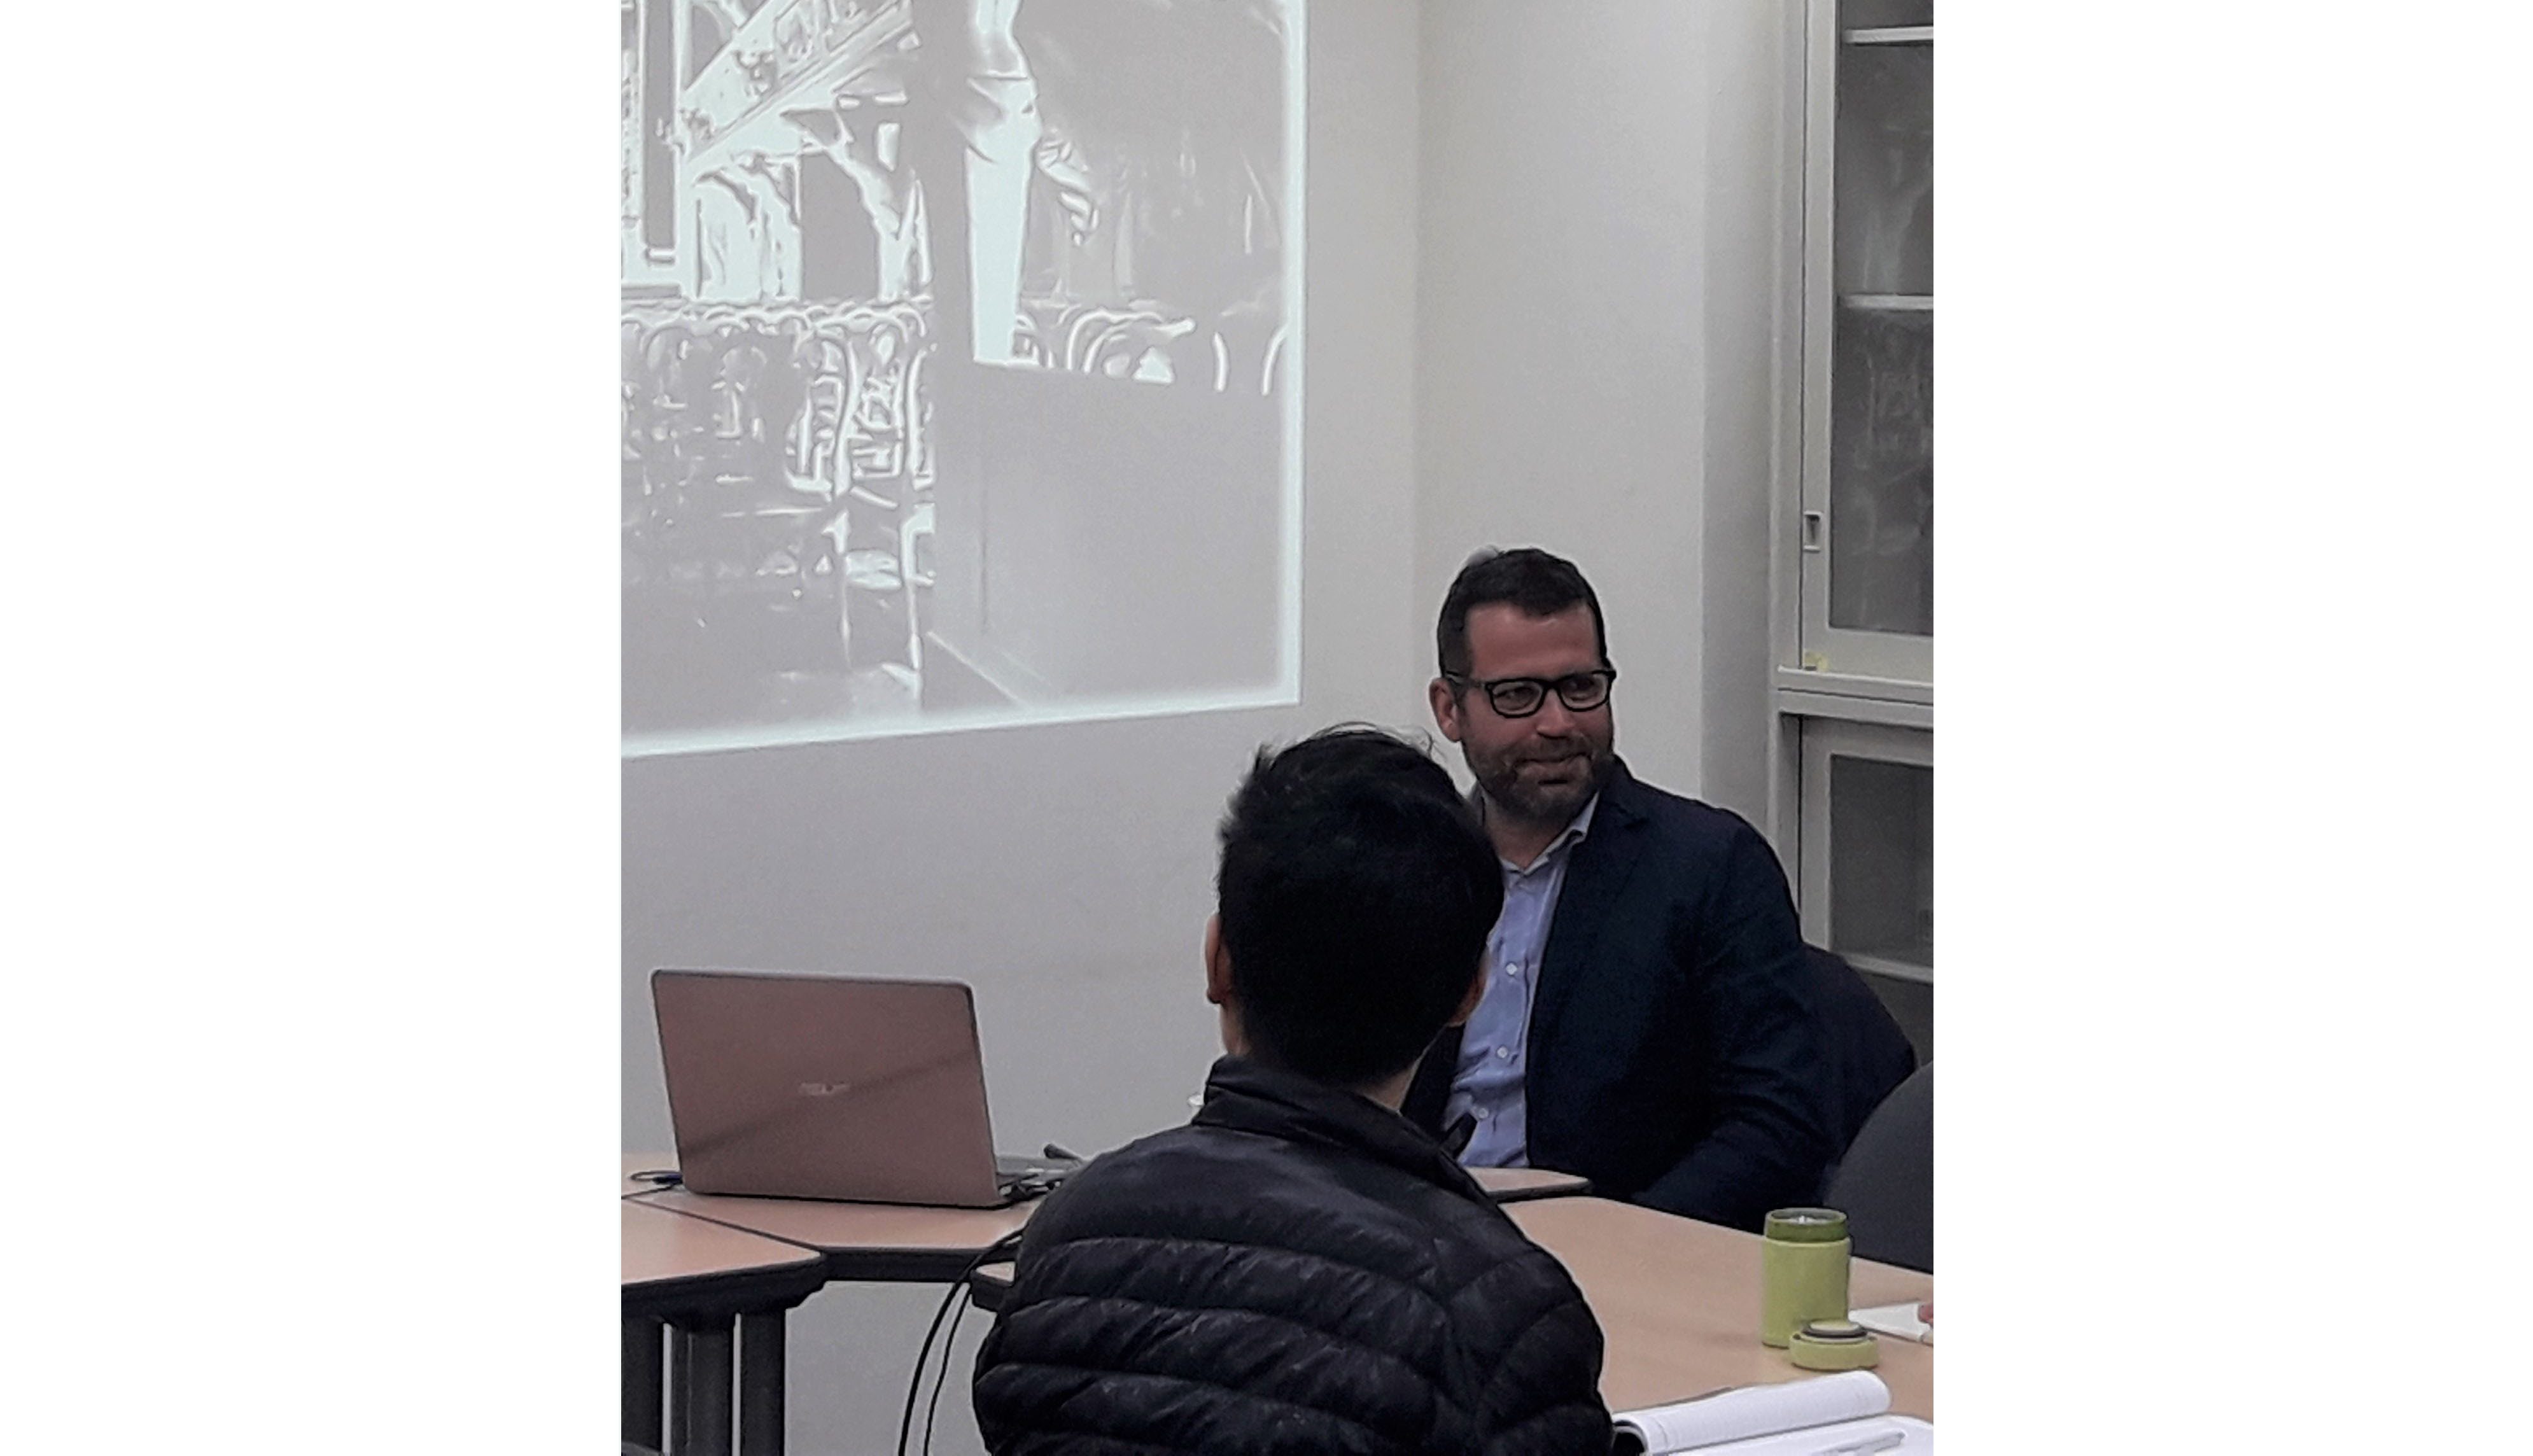 Marco Musillo 教授演講「Quadratura and Qing lllusionistic Painting in Eighteenth-Century Beijing: New Explorations and Methodological Perspectives」紀要